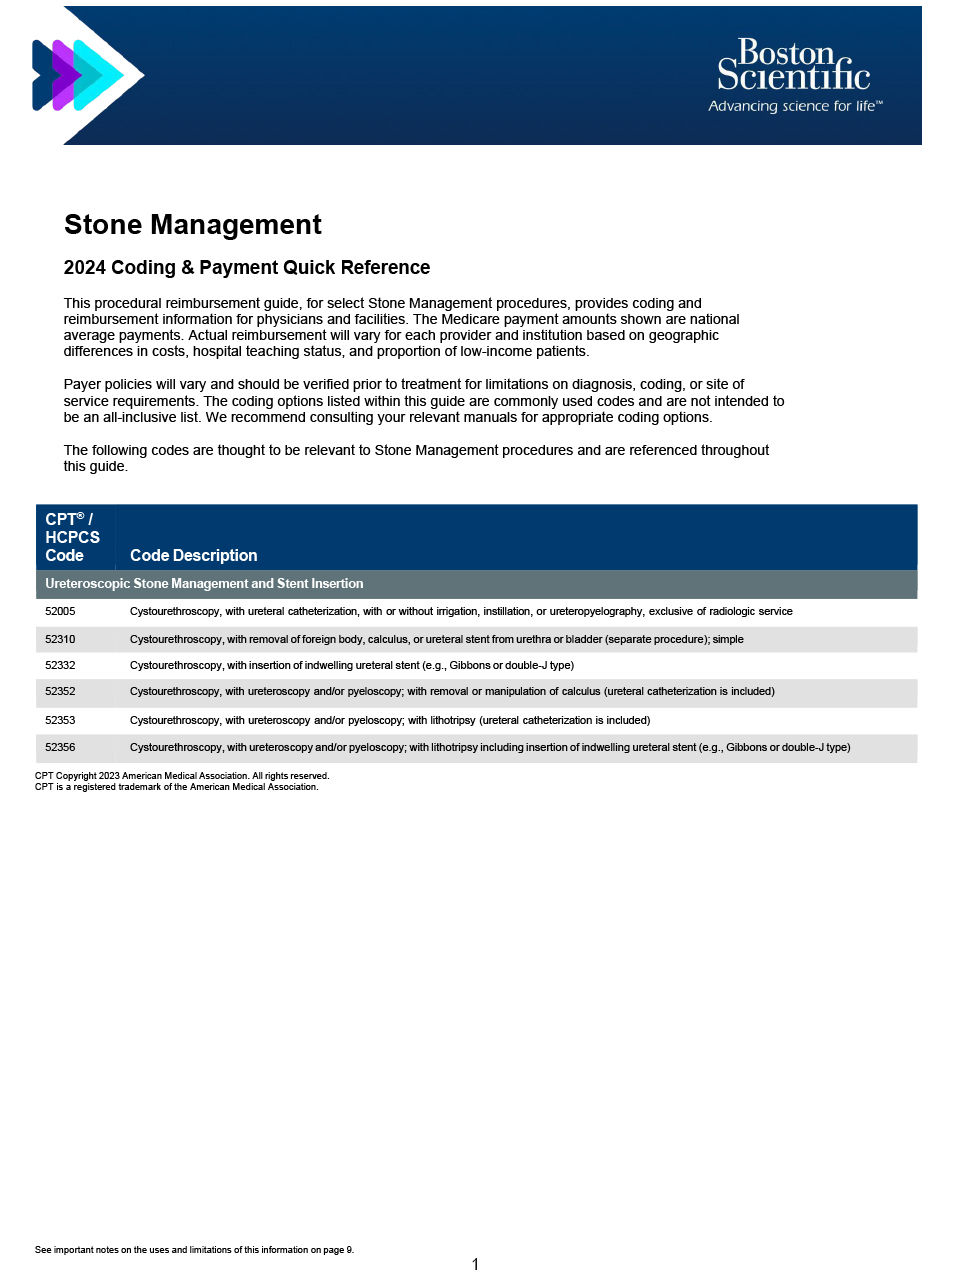 Stone Management Coding and Payment Guide